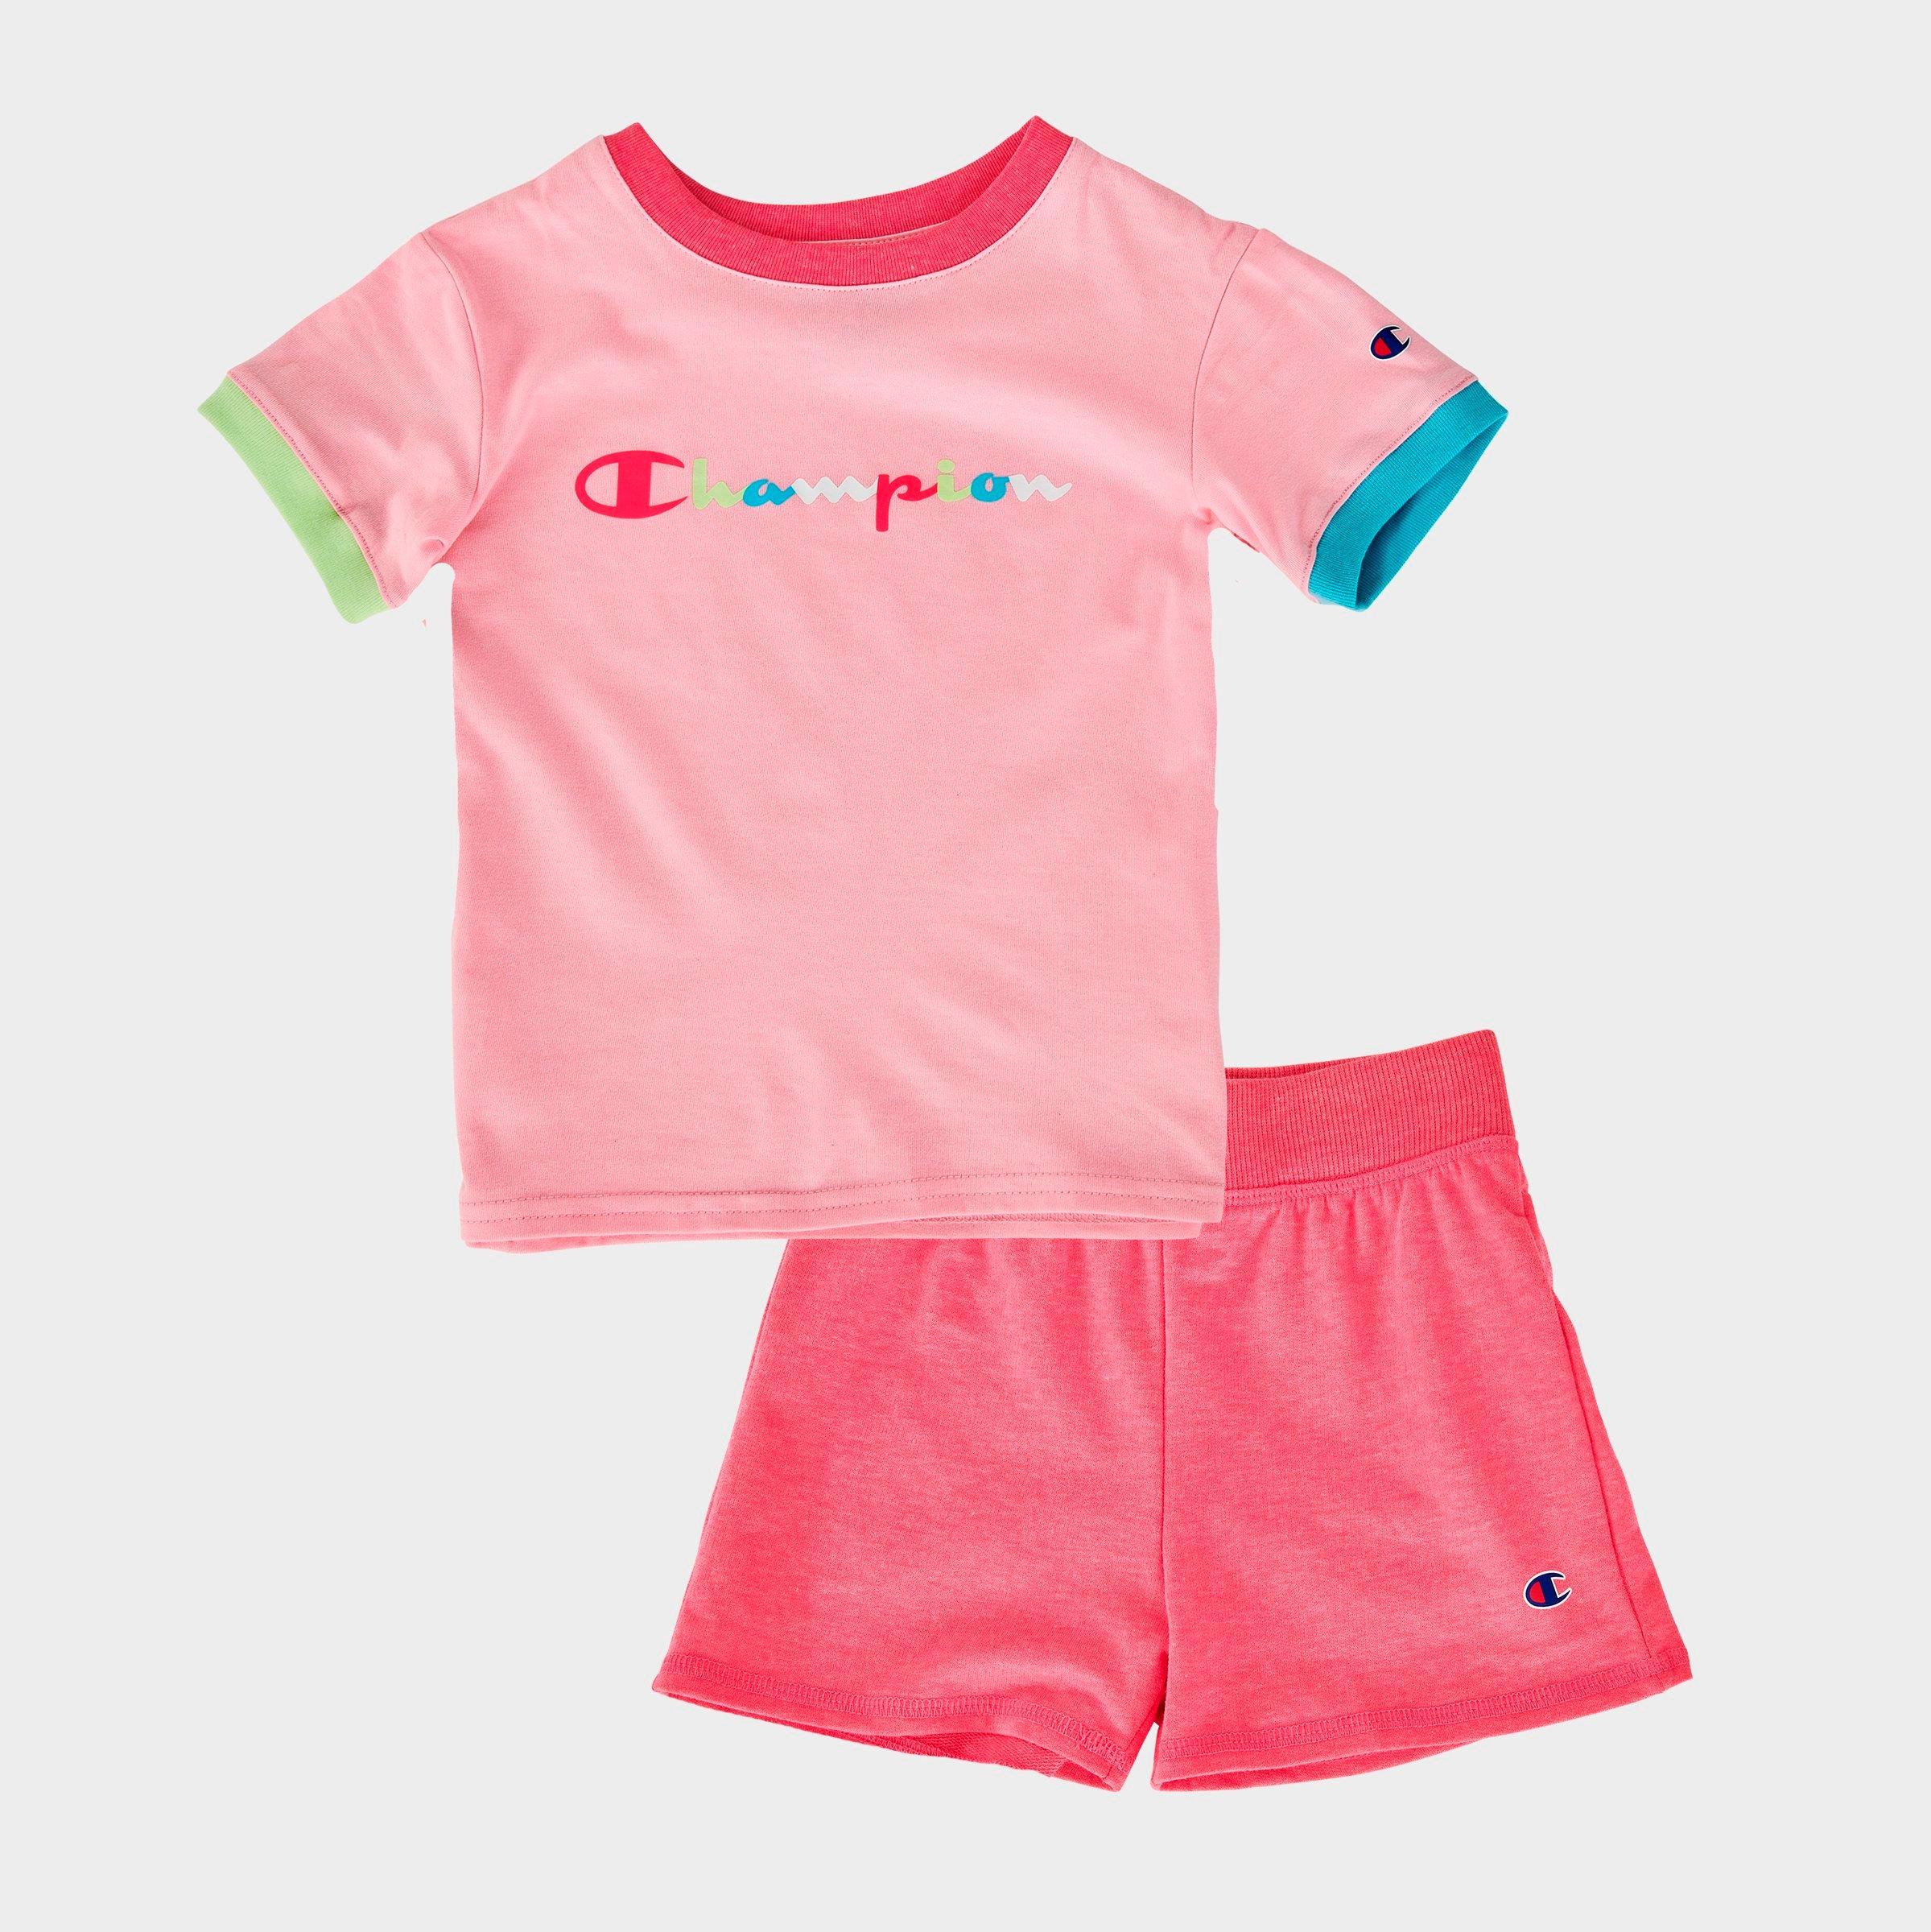 champion toddler outfit